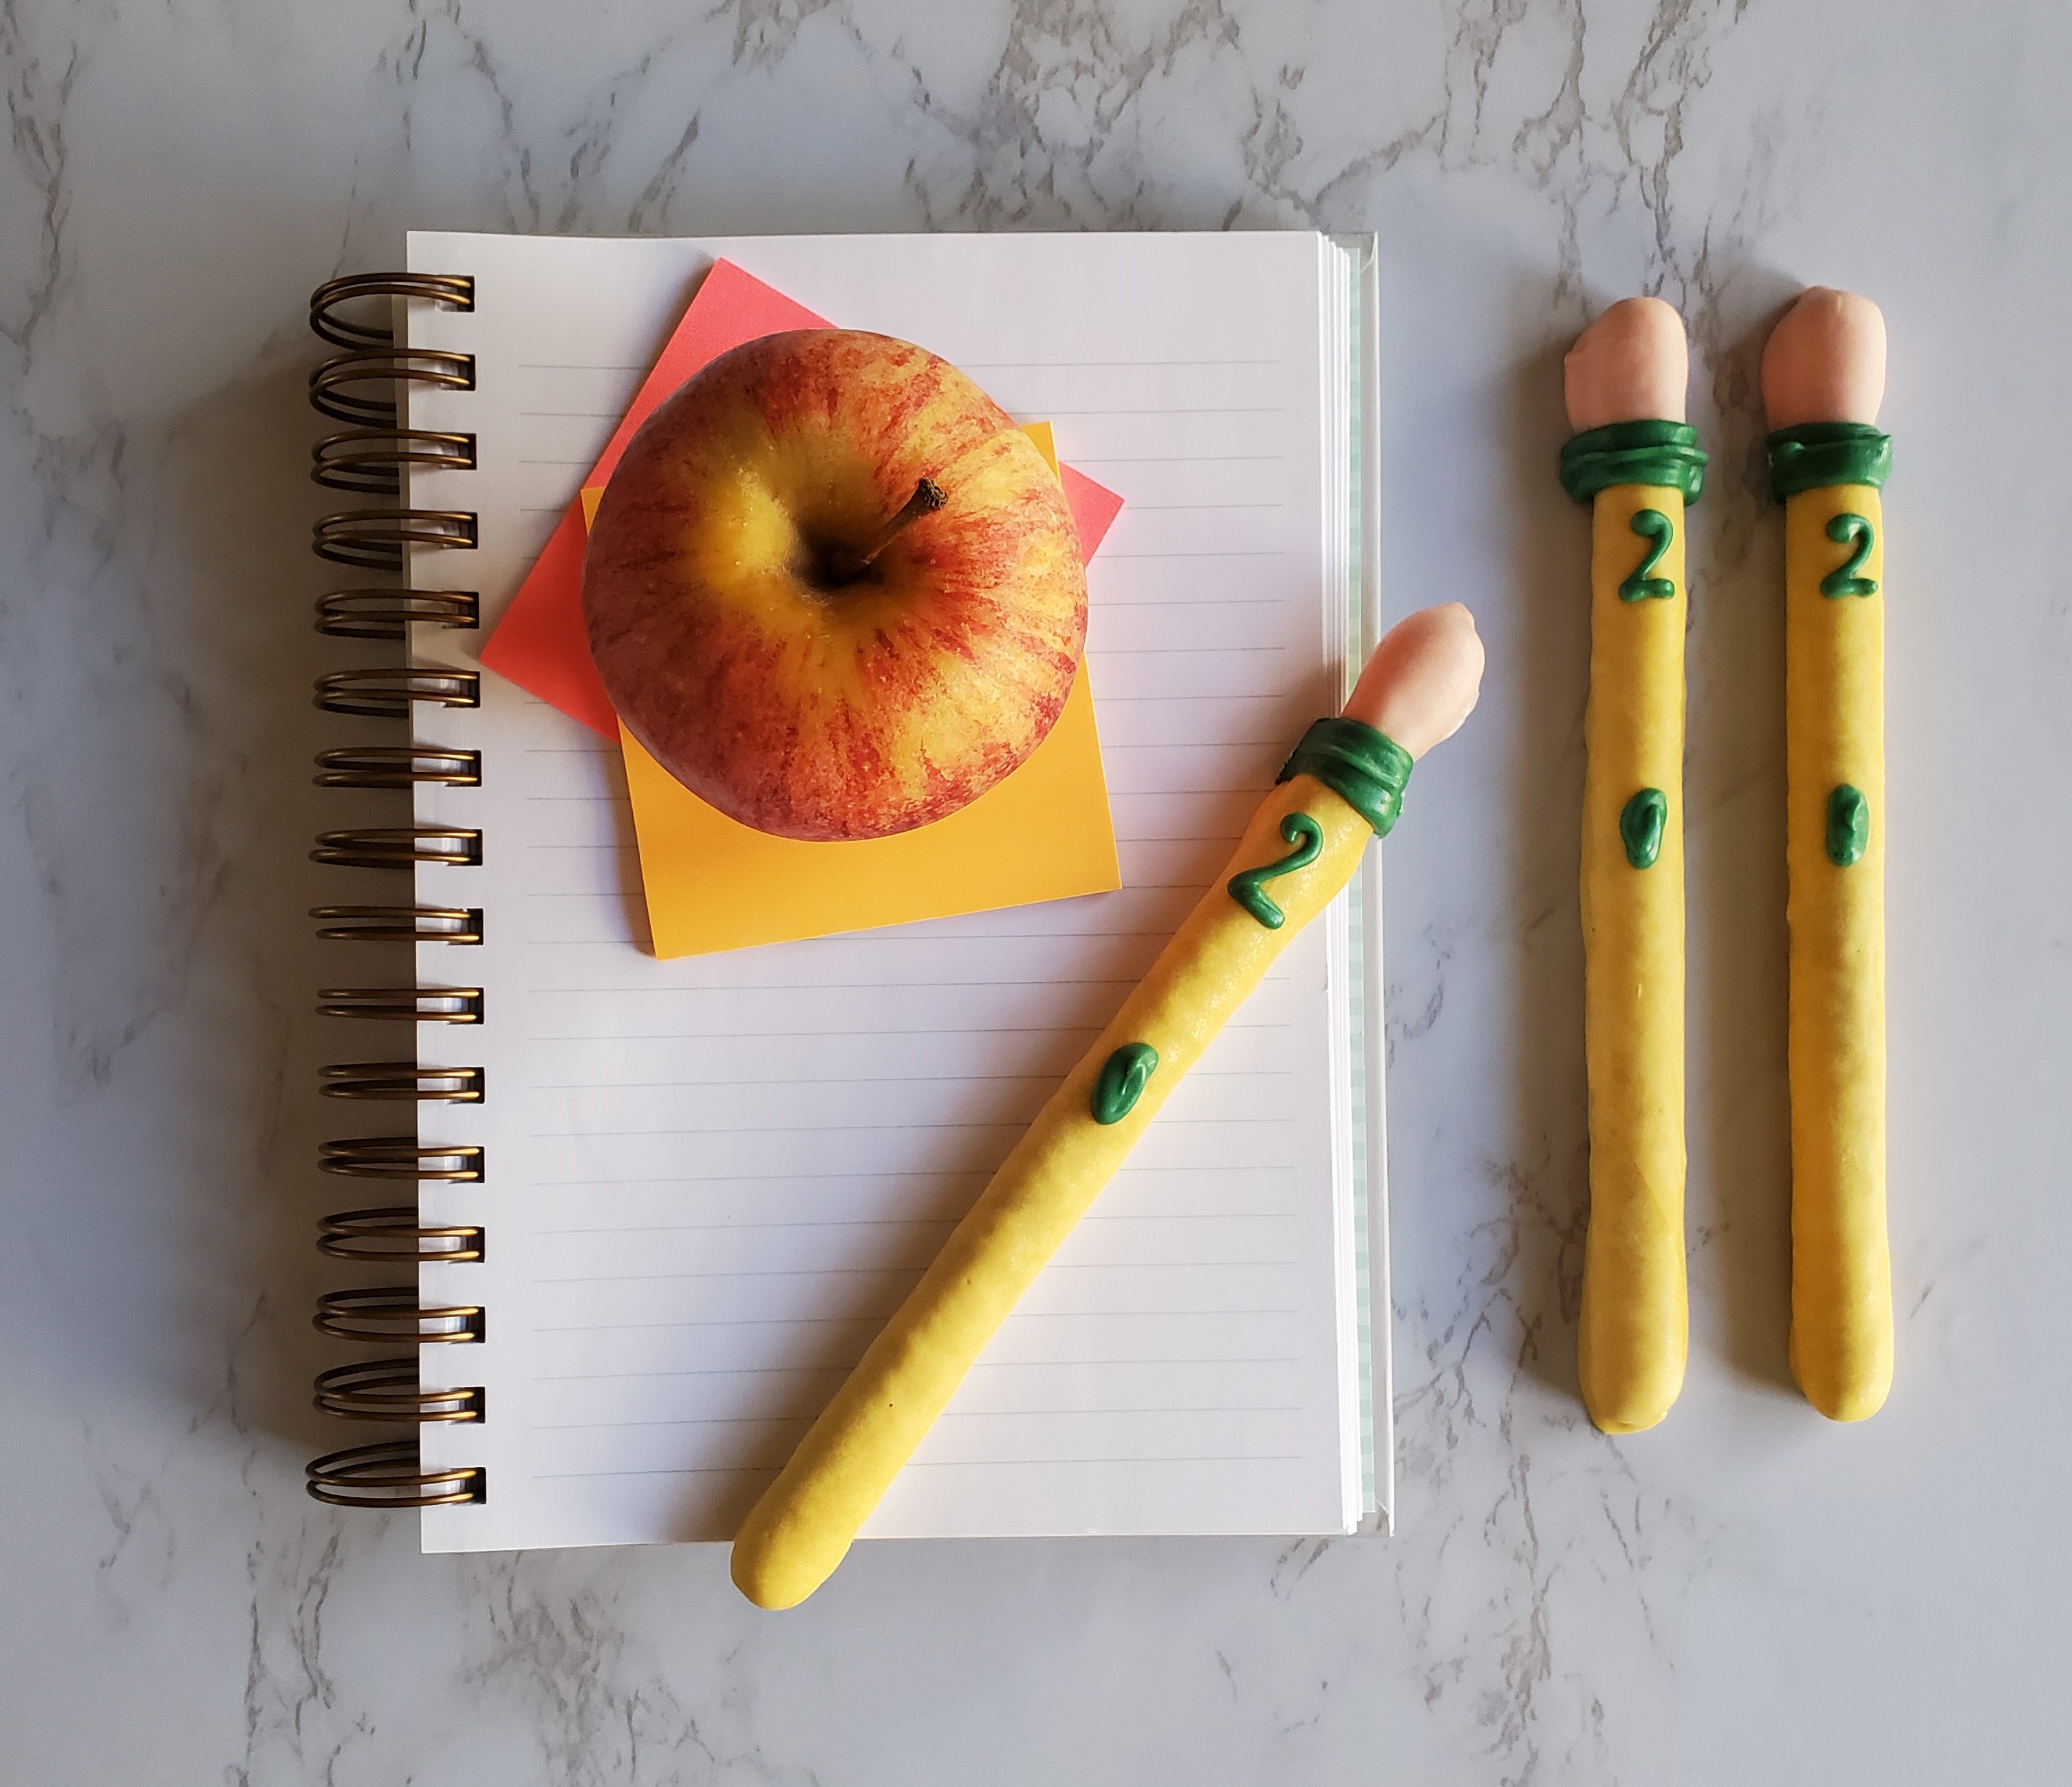 Candy "pencils" made from pretzel rods lay on top of a school ruled notebook and post-its with a lunch room style apple on top of a marble counter.